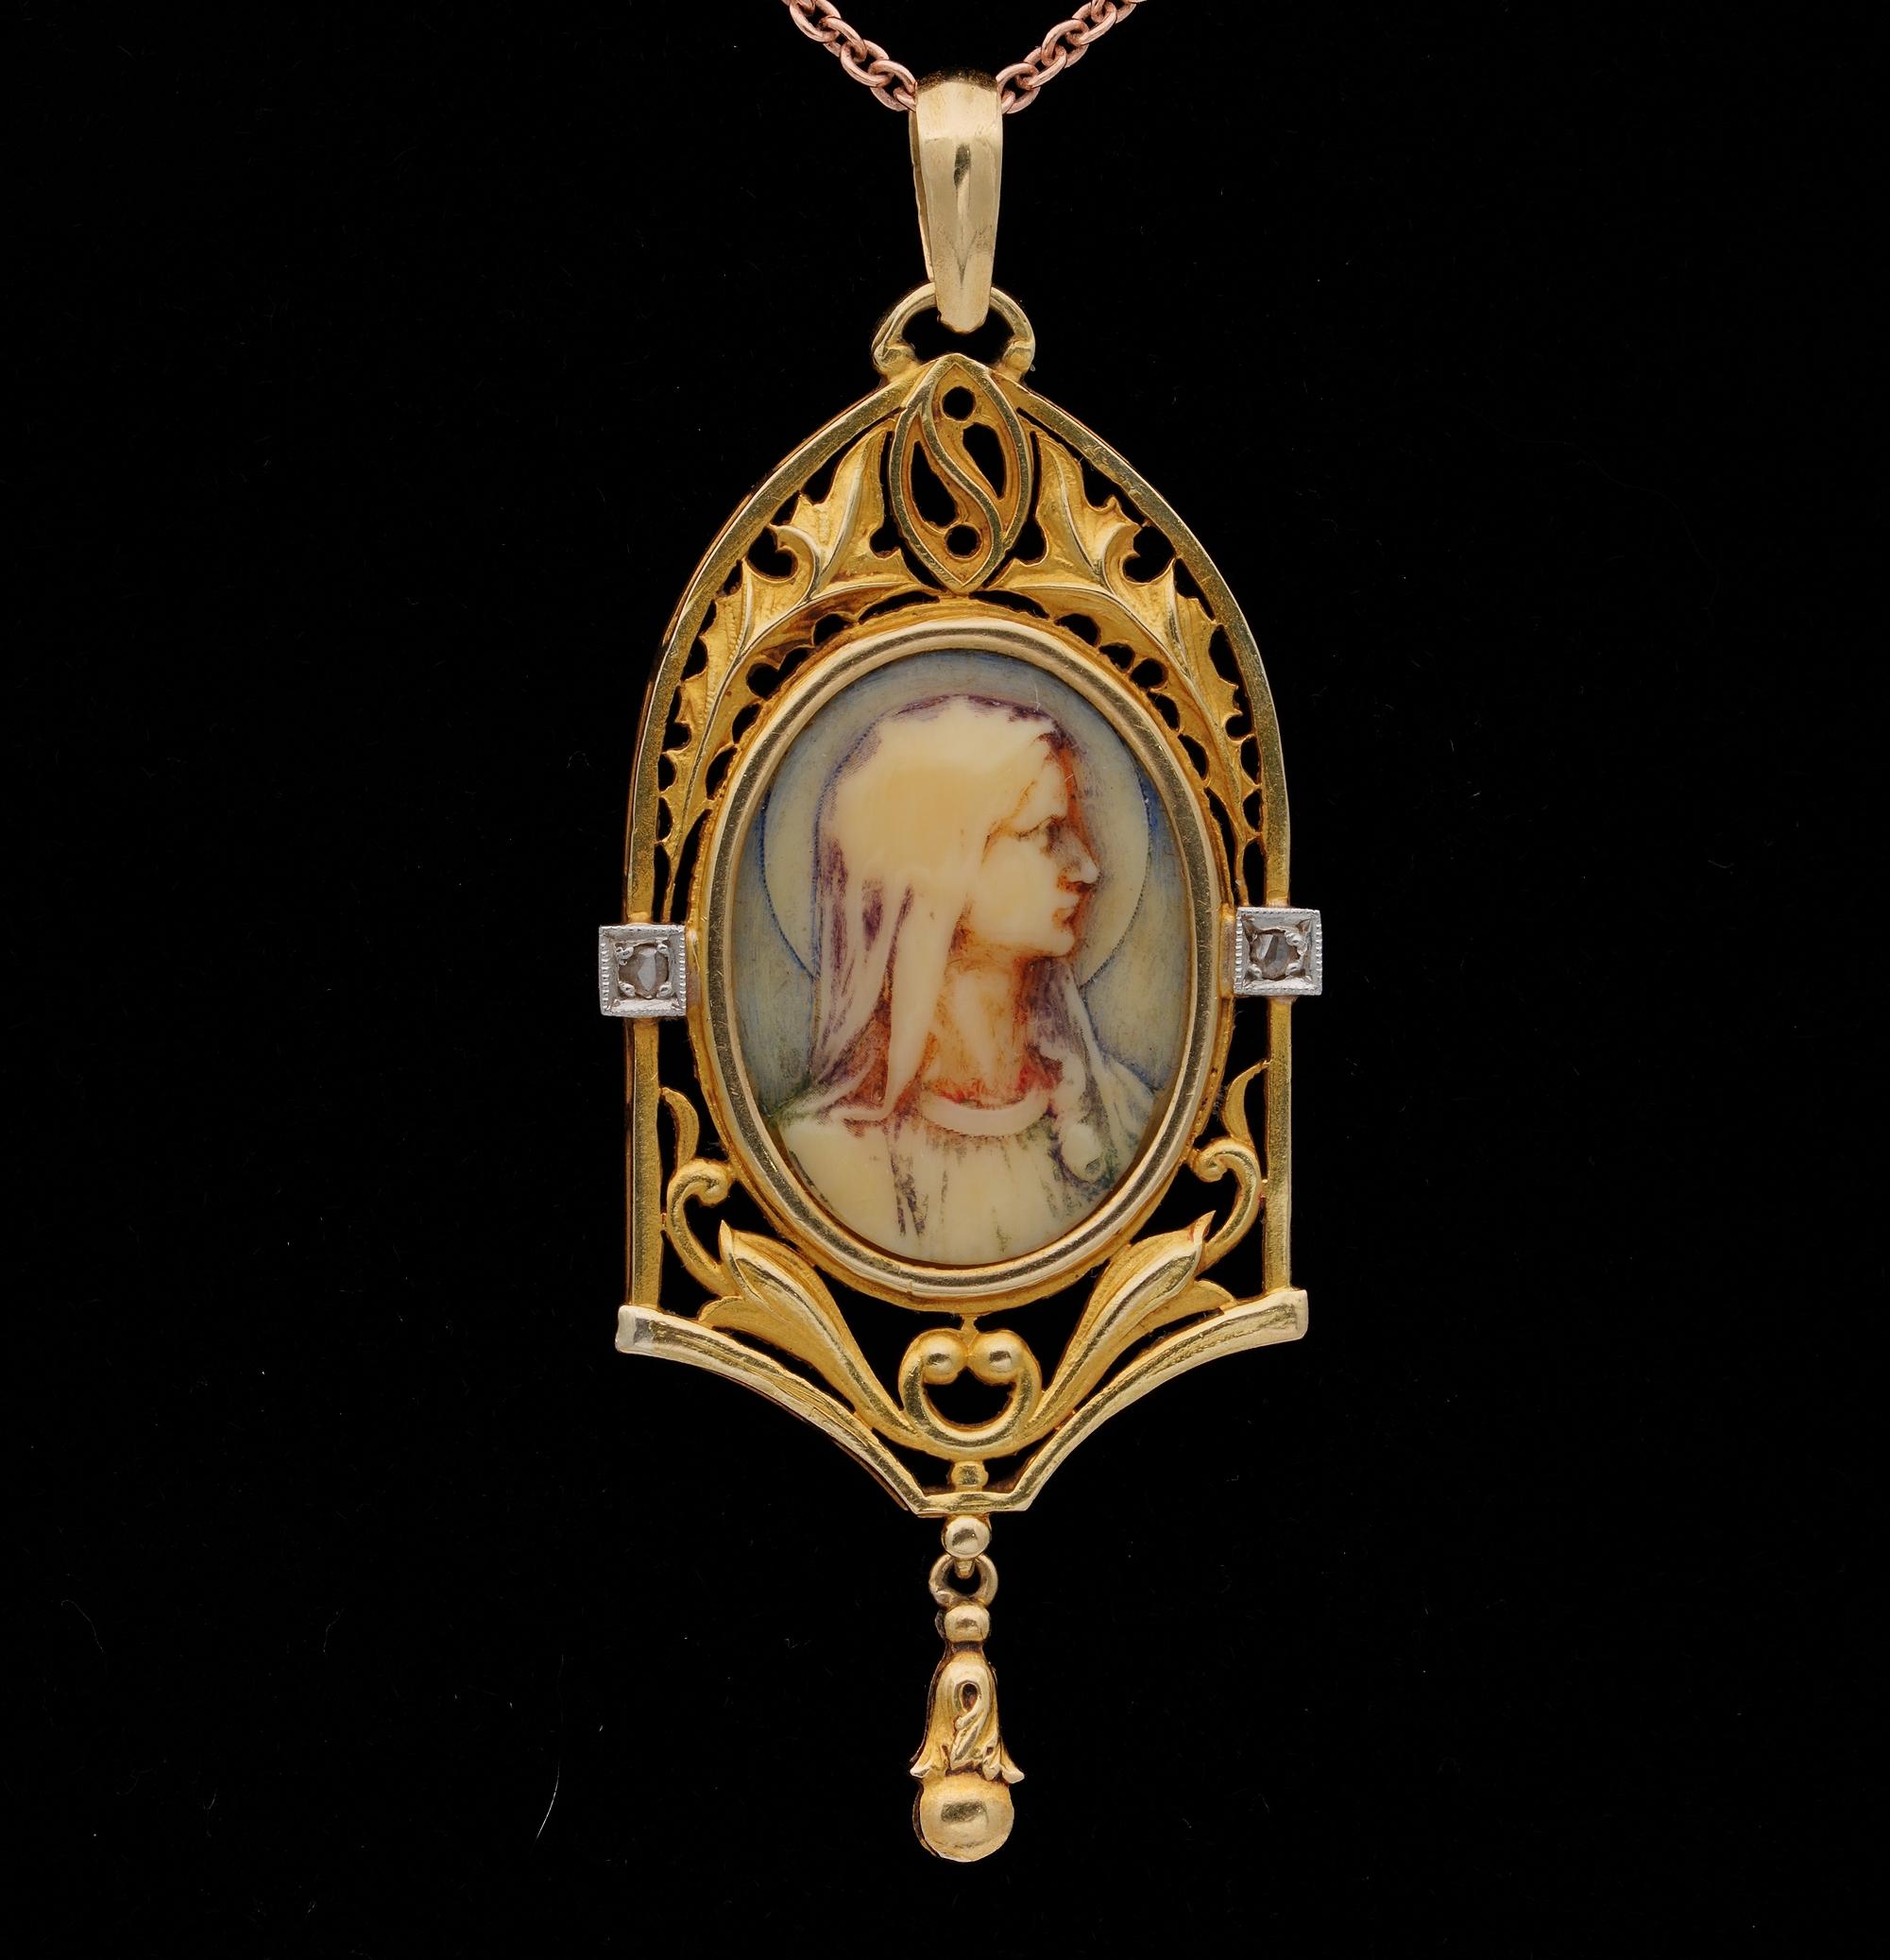 Past Emotion

Beautiful antique from the Art Nouveau period is this charming pendant boasting marvellous workmanship, artistry made of solid 18 KT gold
The gold details are amazing framing the Virgin Mary skilfully carved from organic material and